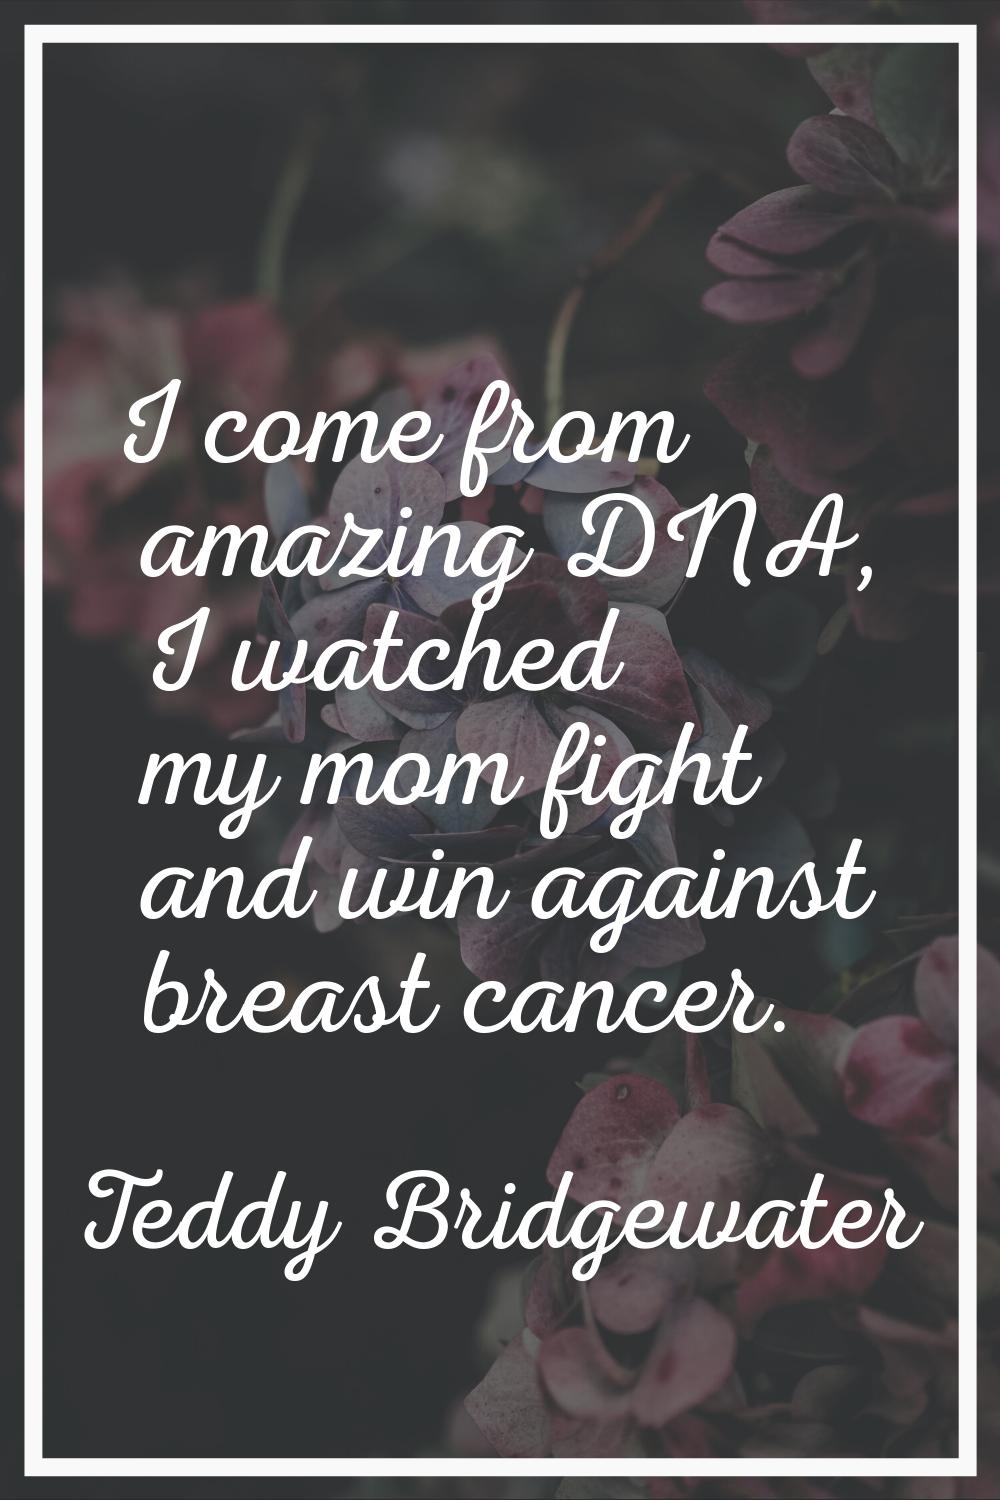 I come from amazing DNA, I watched my mom fight and win against breast cancer.